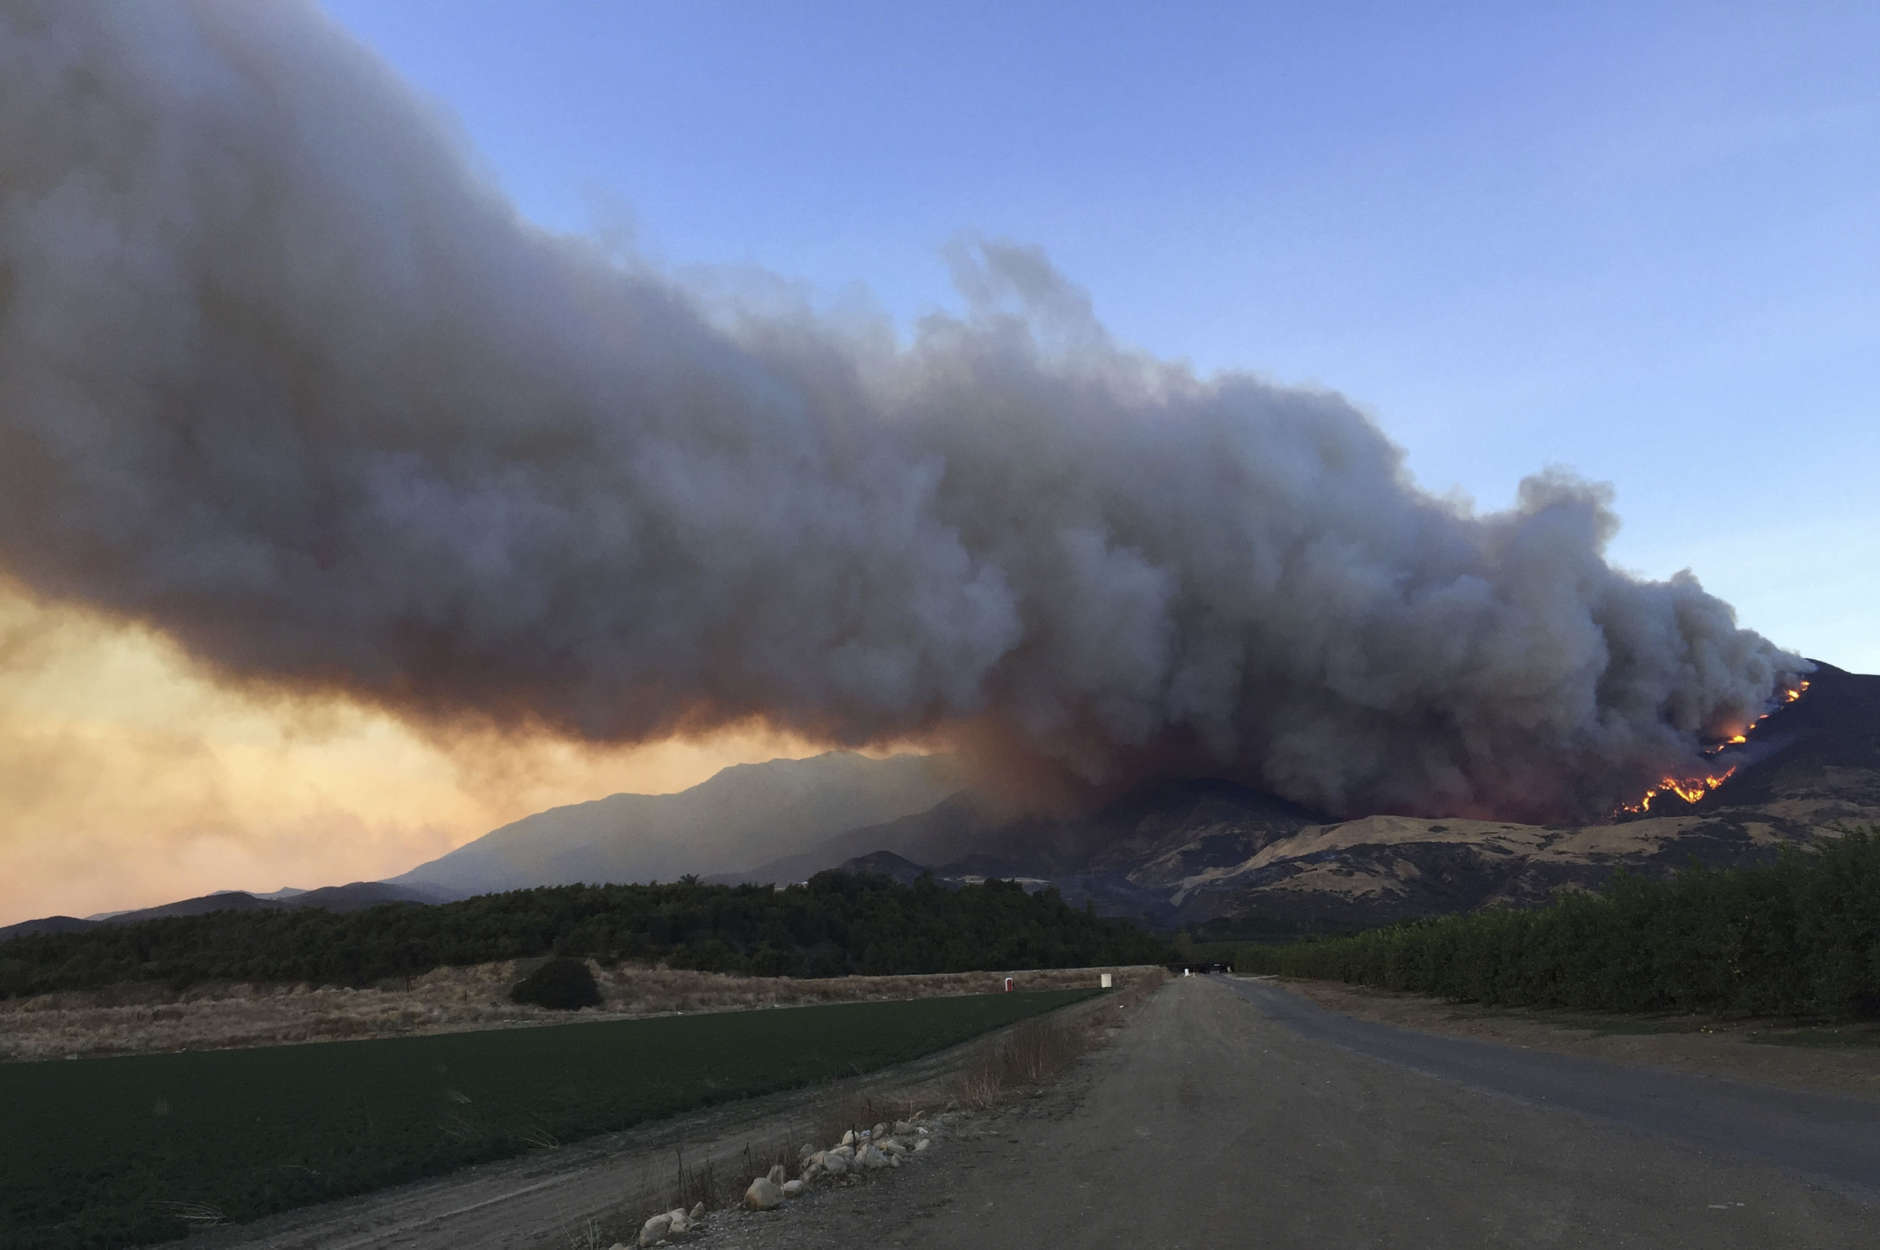 A wildfire burns off of the hills next to CA-126 highway, just northwest of Fillmore, Calif, Thursday, Dec. 7, 2017. Thousands of homes remain threatened by at least four major Southern California wildfires that have destroyed structures and sent residents fleeing. (AP Photo/Amanda Lee Myers)